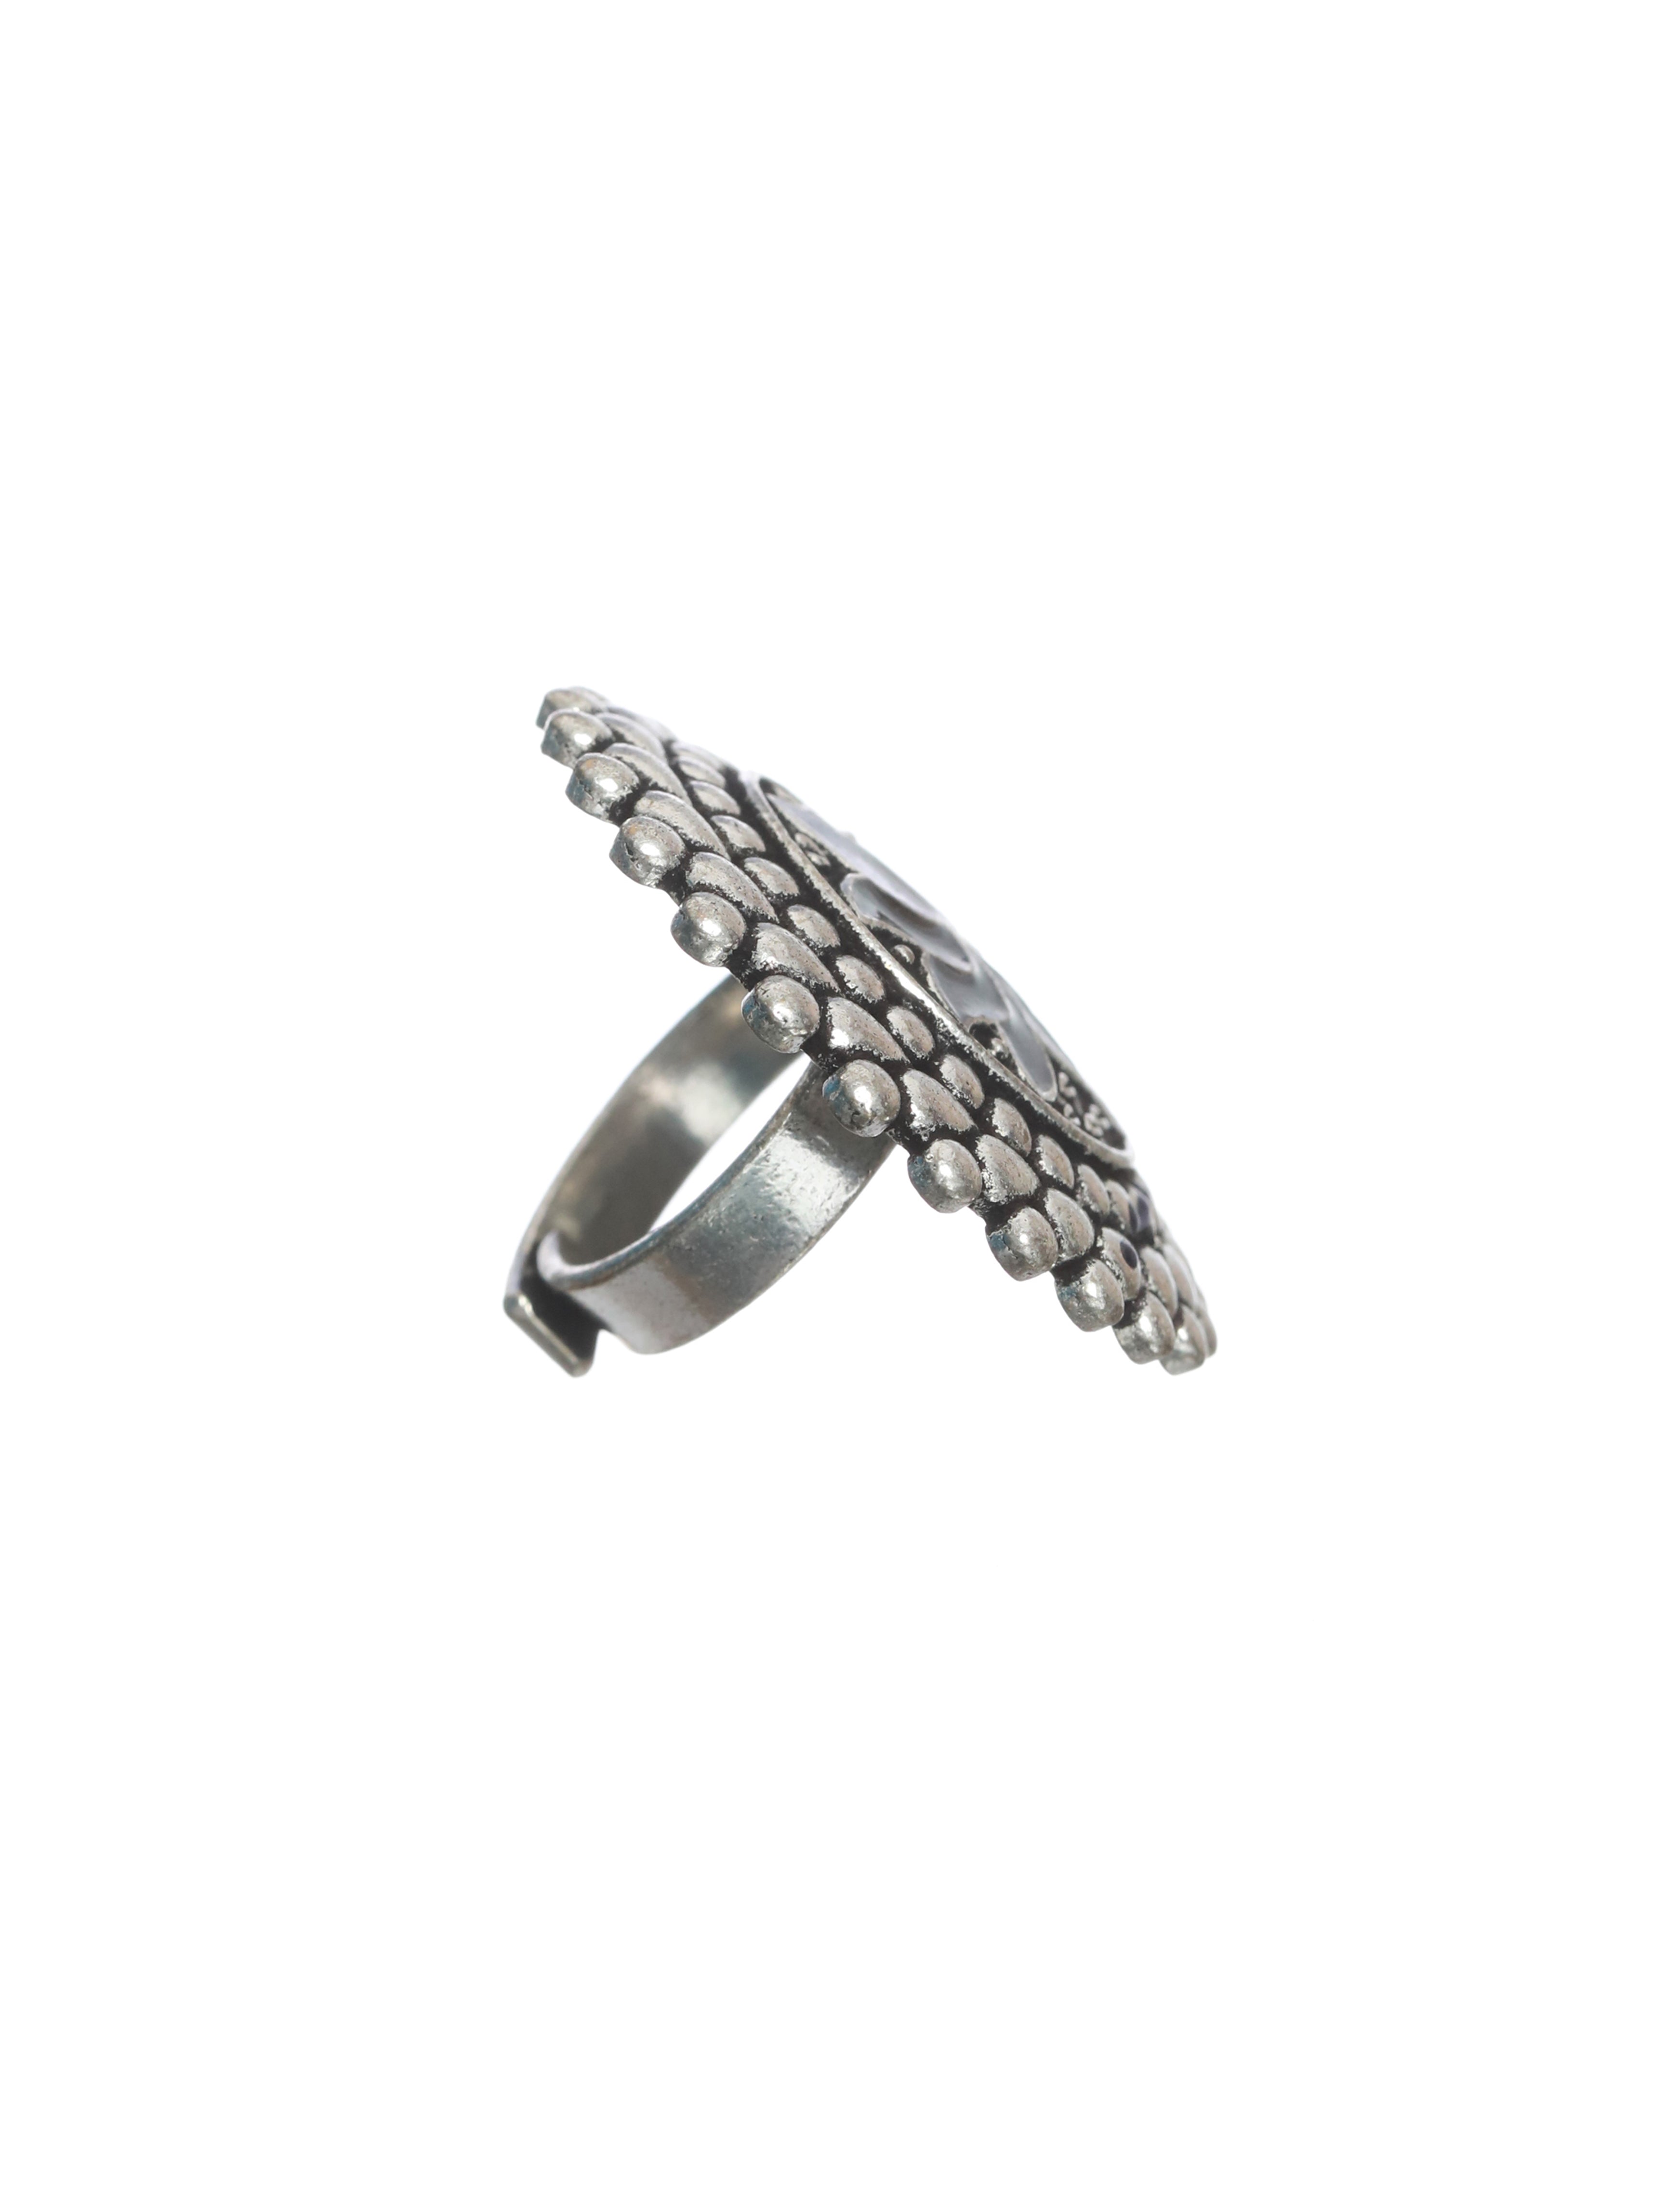 Oxidised Lotus-Shaped Silver-Plated Adjustable Handcrafted Finger Ring